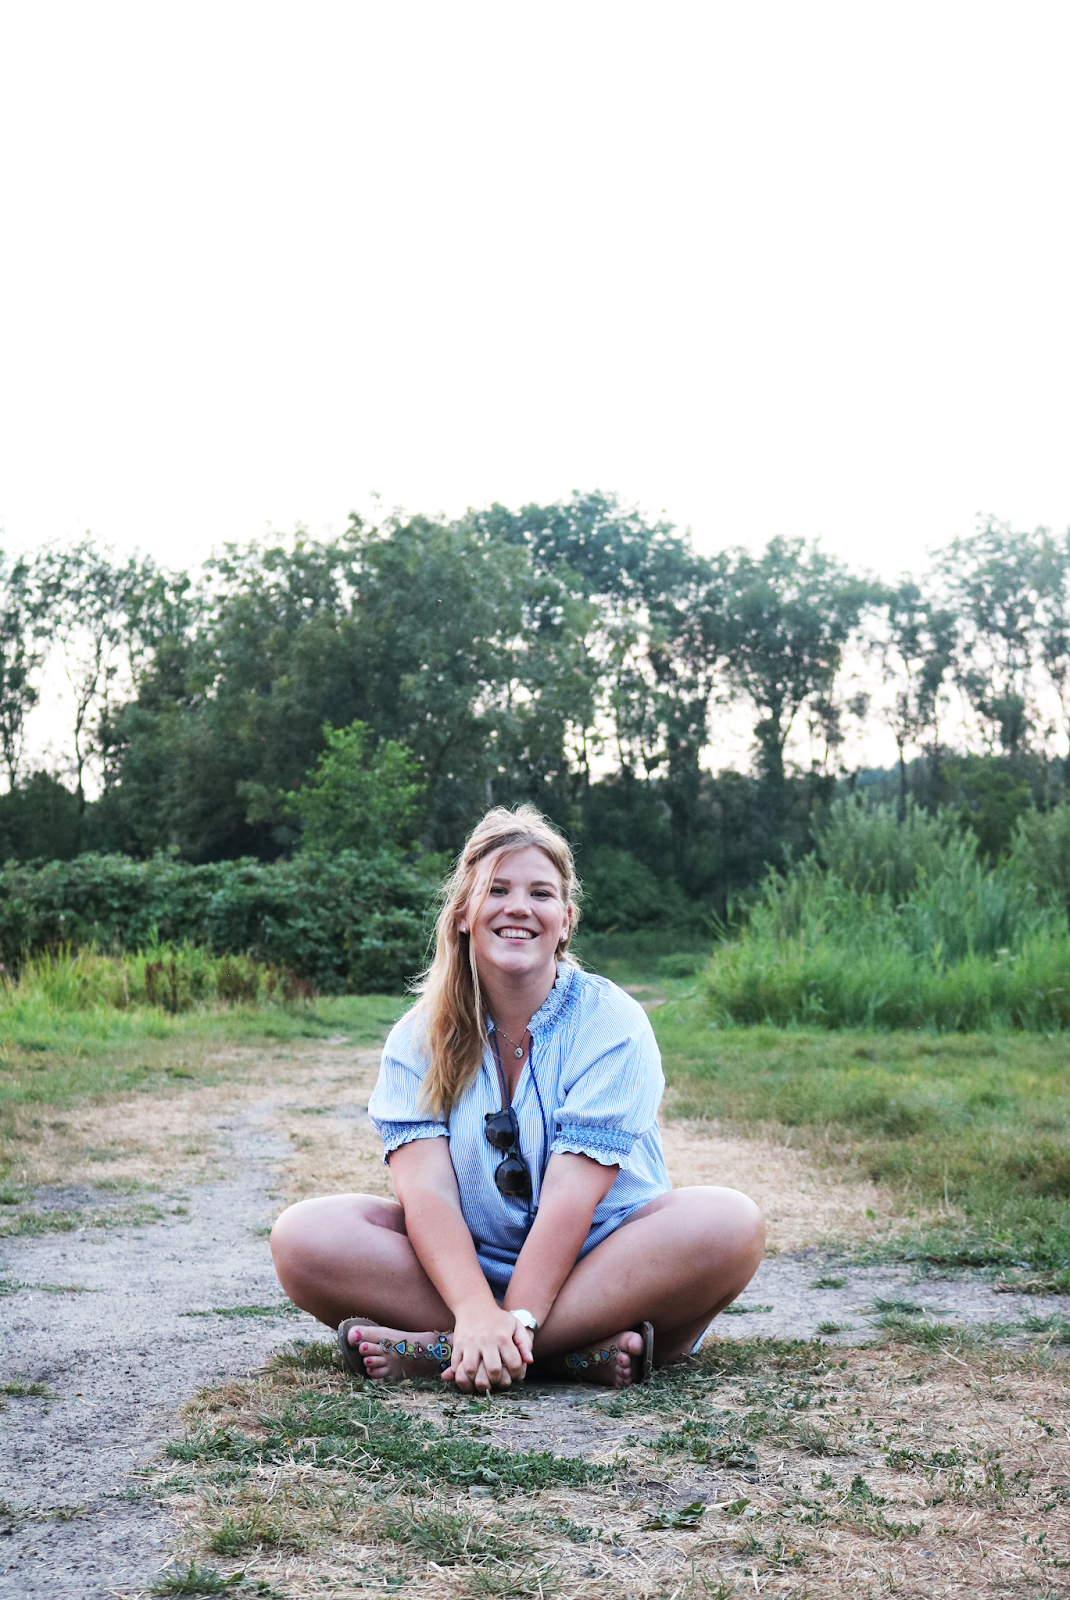 Photodiary 147 | Summer shoppings, quality time met vriendinnen & relax weekend!